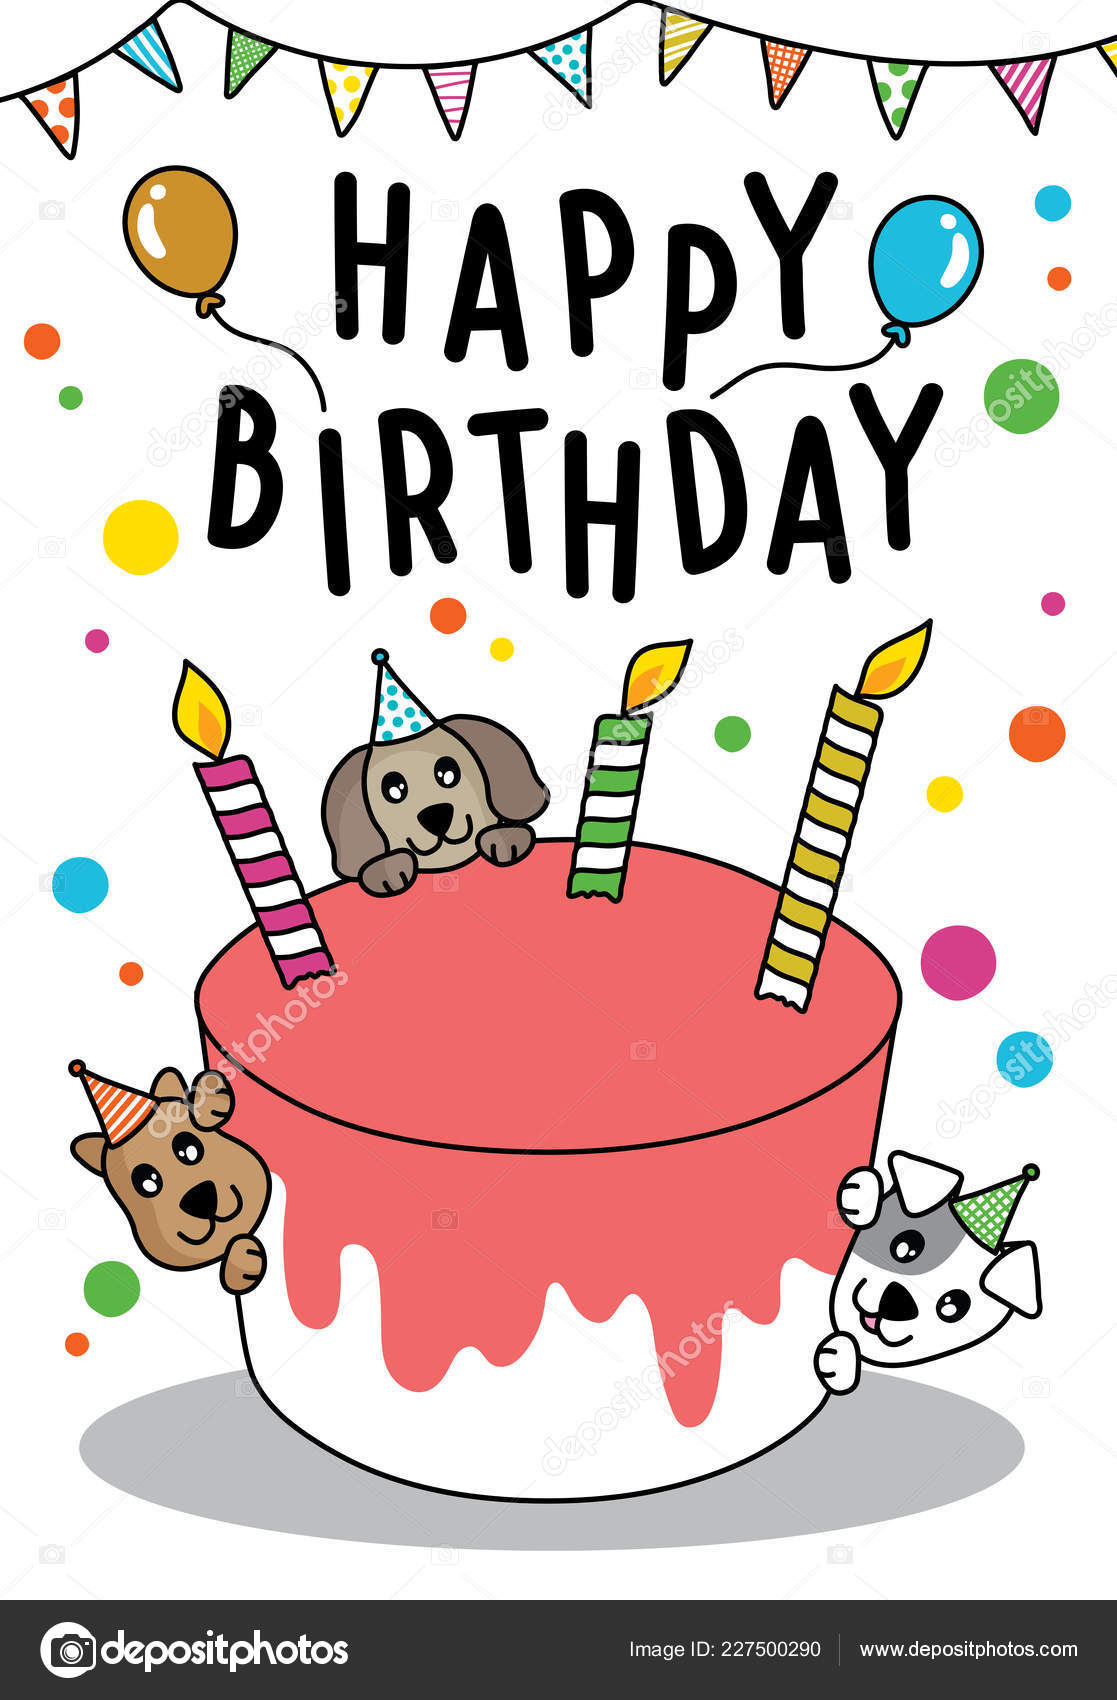 Download Vector Doodle Cute Cat Dog Cake Happy Birthday Card Have ...